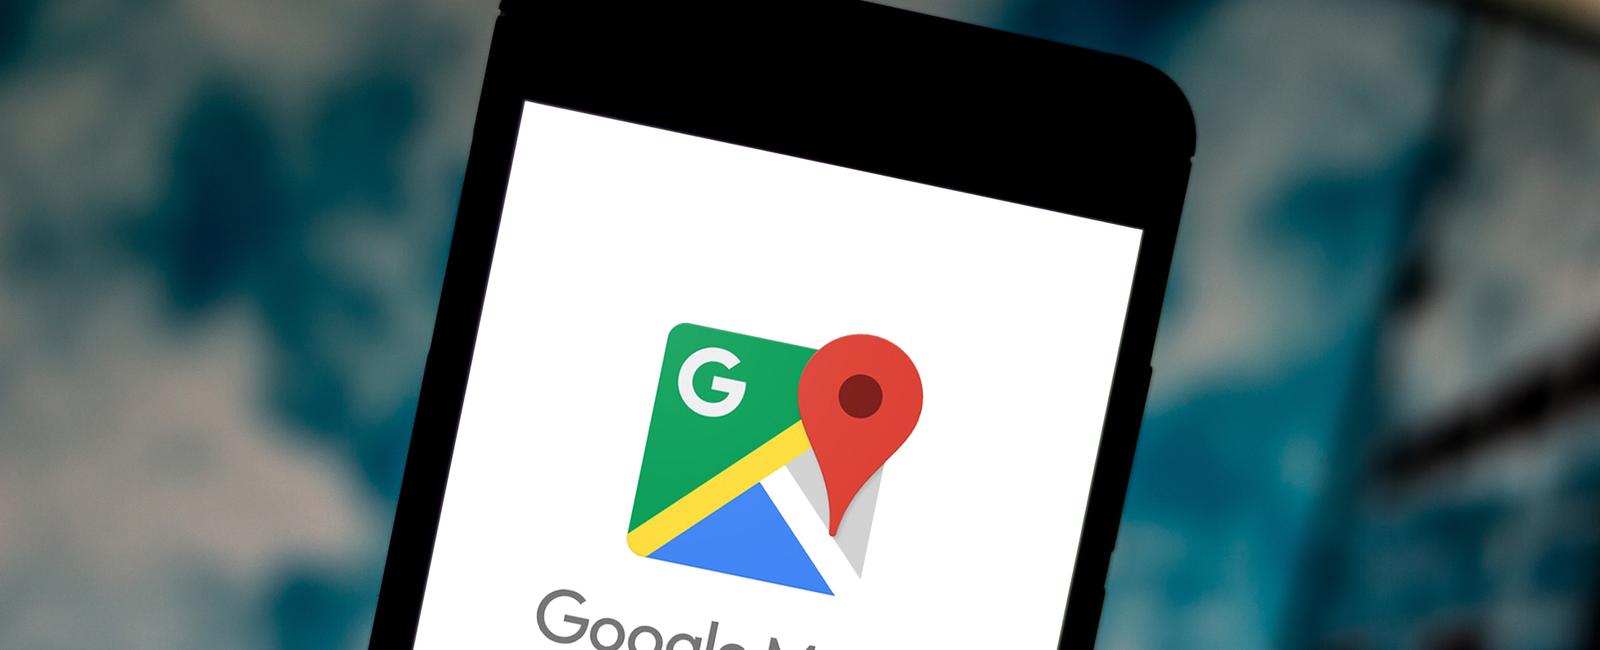 Get Found on Google Maps - 7 Tips to Optimize Your Medical Practice